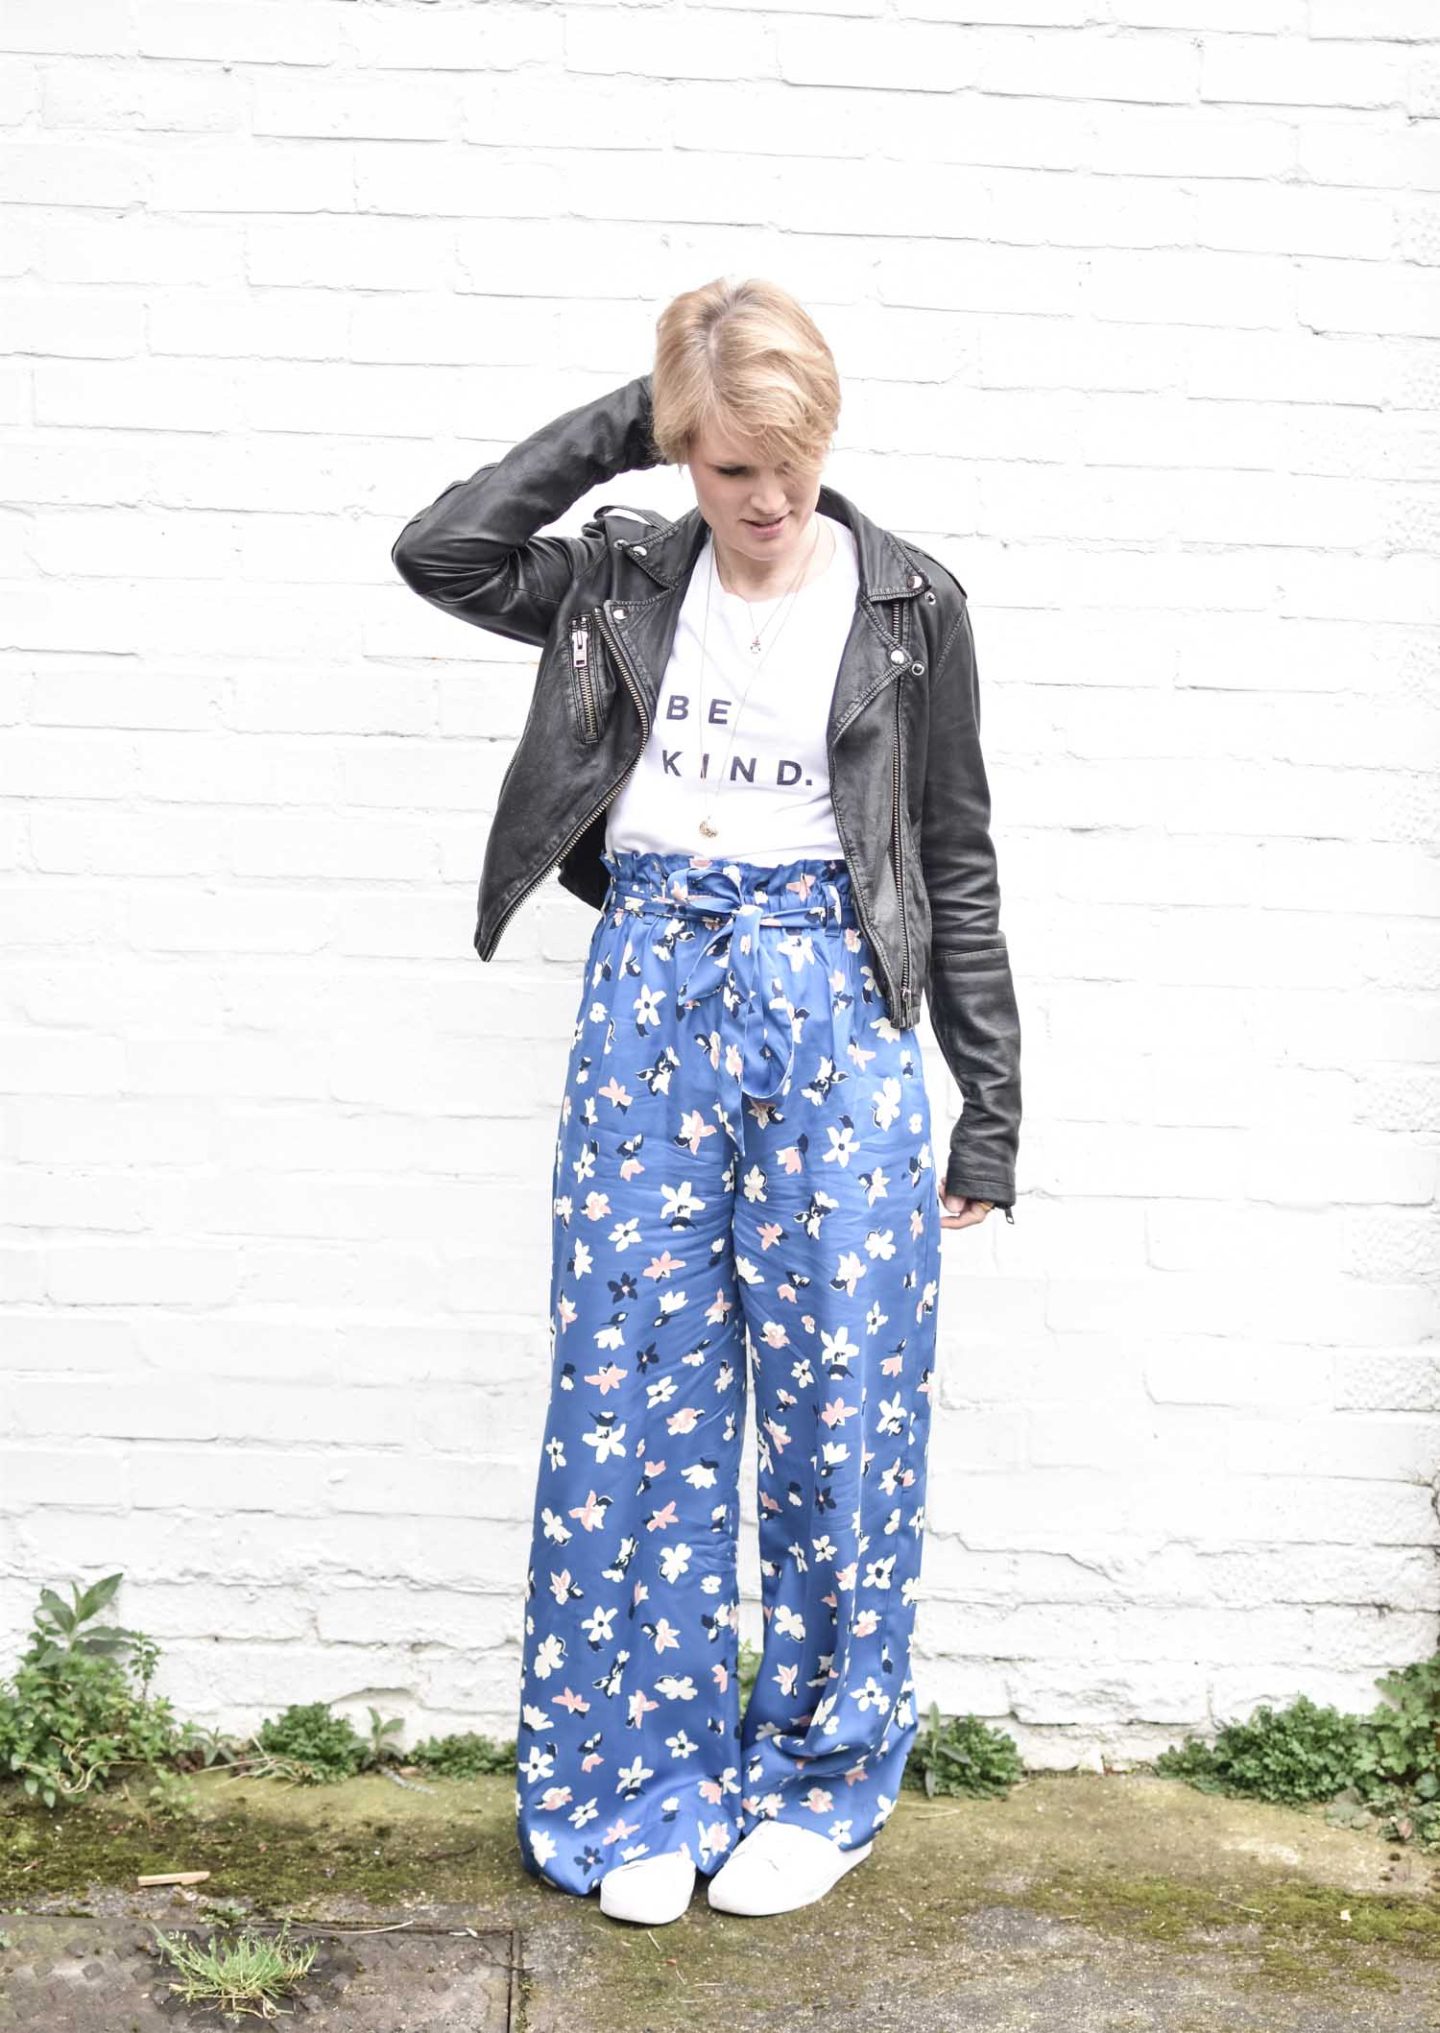 Ethical Fashion Blogger Karen Maurice of n4mummy wears wide floral trousers by People Tree, a slogan T from Self Care Co and a leather jacket